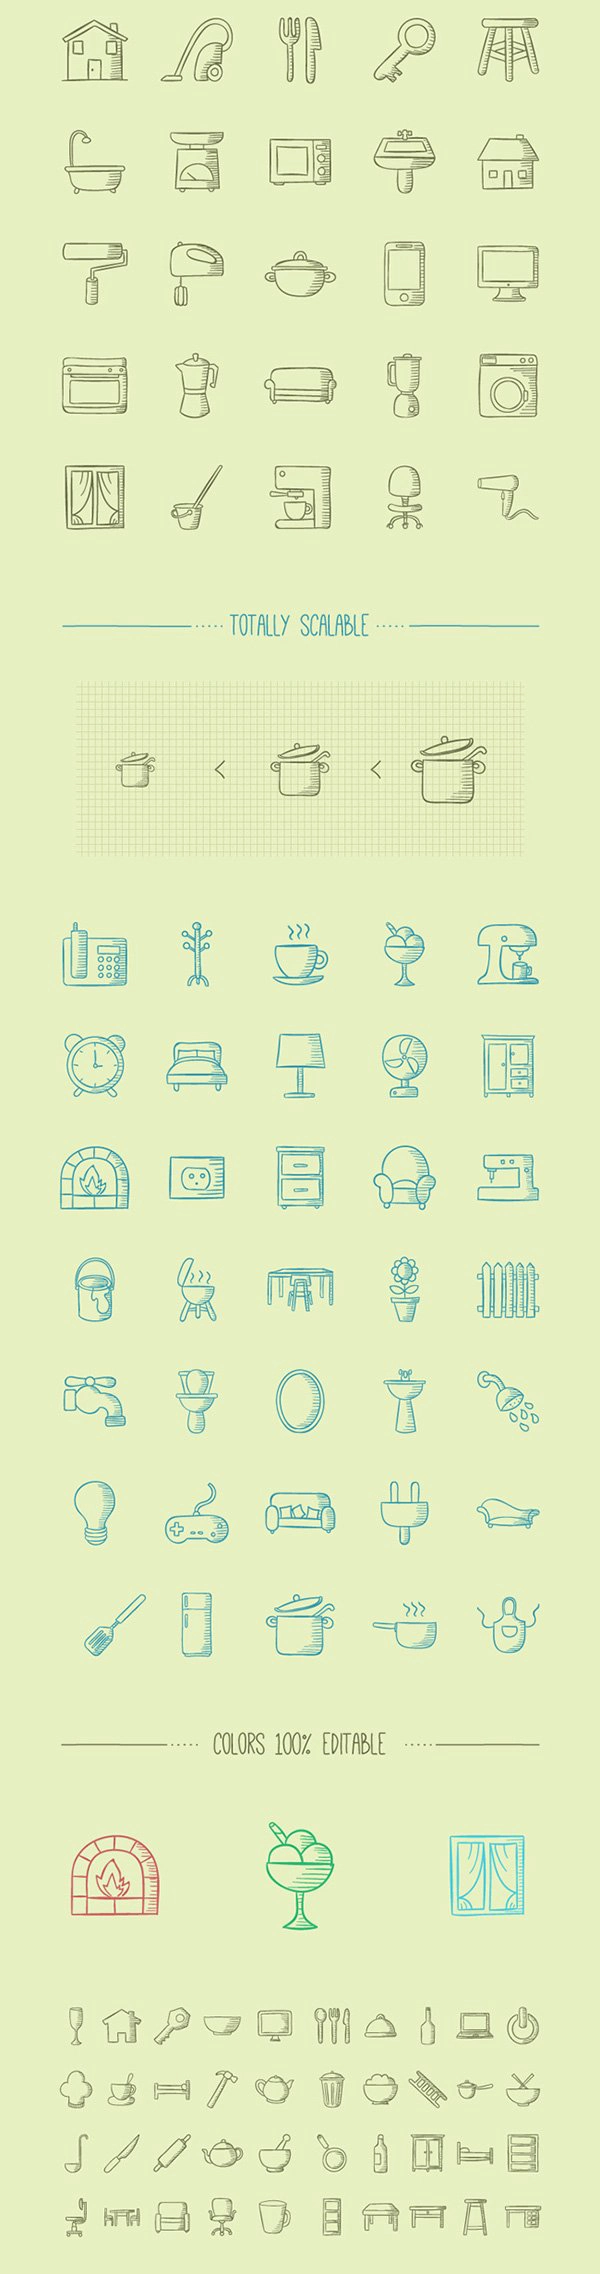 100 Handmade Icons About Home Stuff (exclusive)